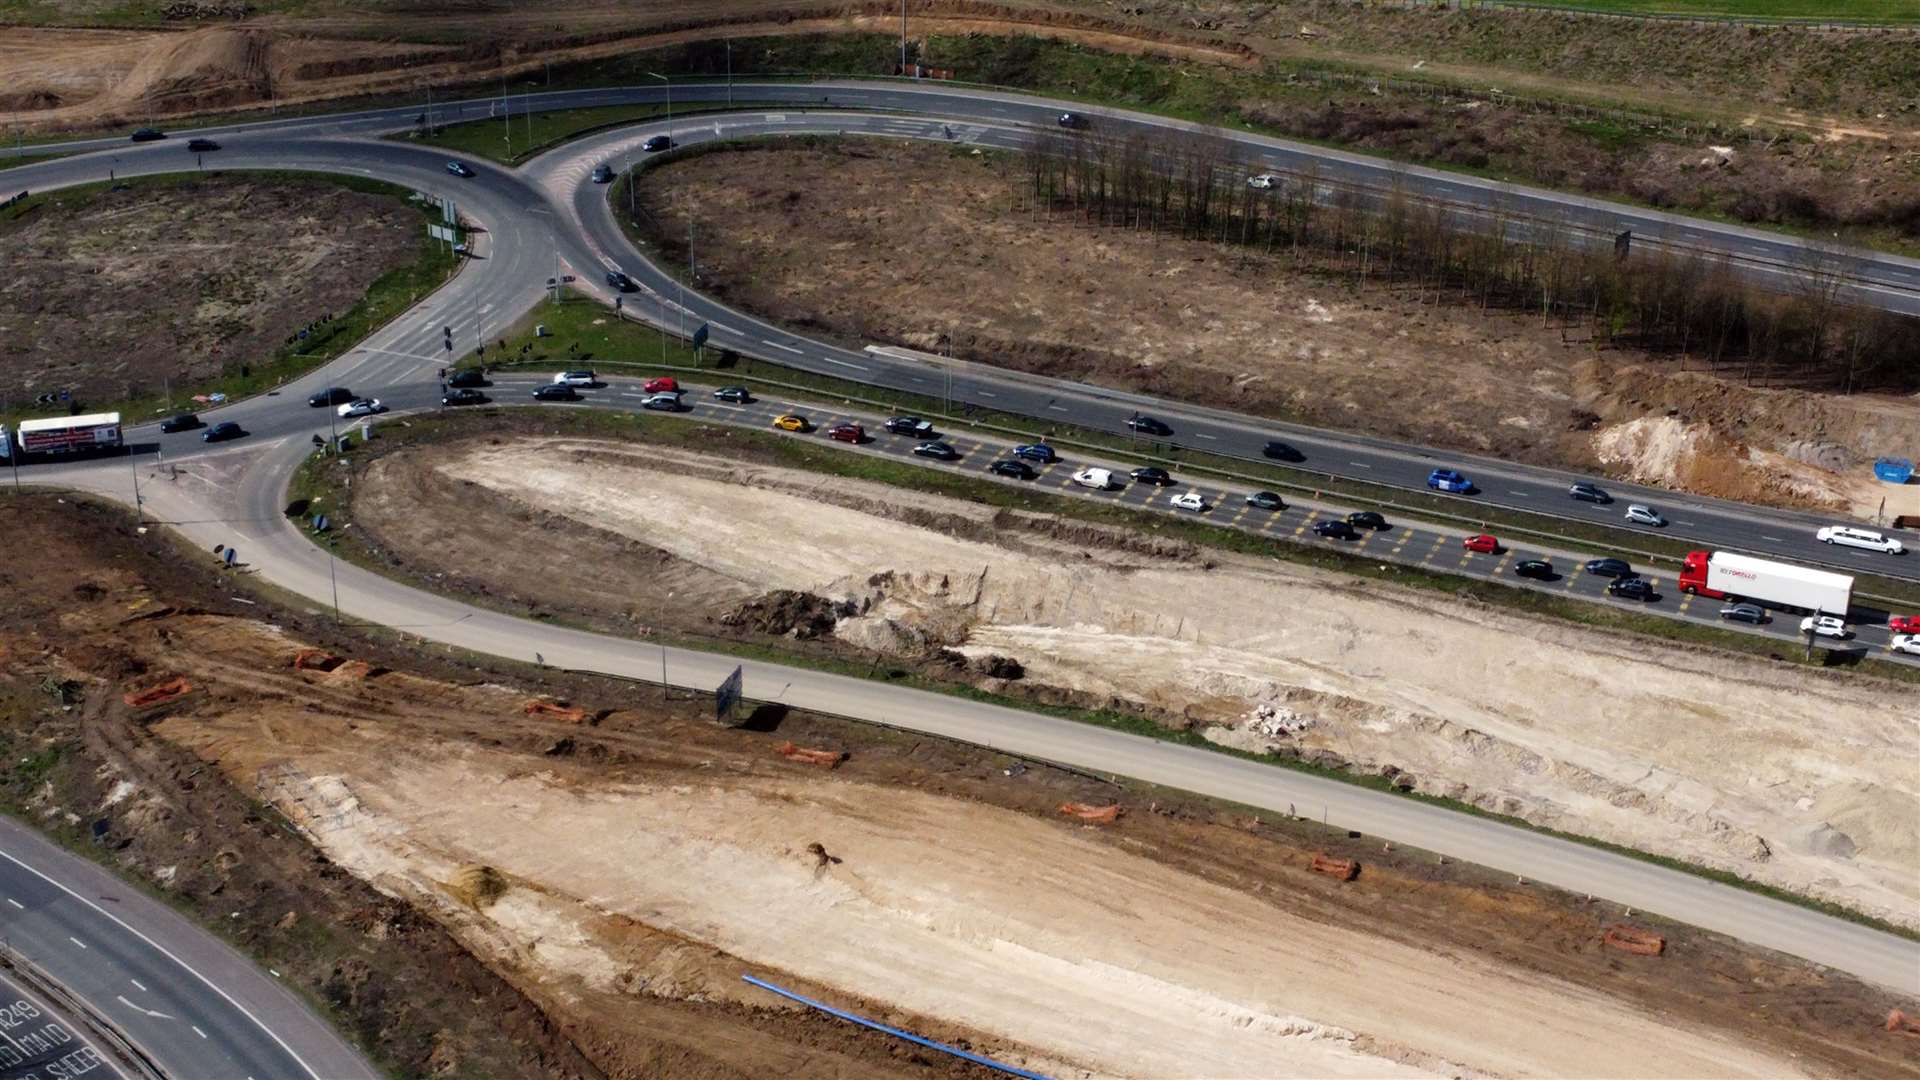 Vegetation has been removed from around Stockbury roundabout as part of a £92m scheme to build a flyover linking the A249 with the M2 at junction 5 near Sittingbourne. Picture: Barry Goodwin